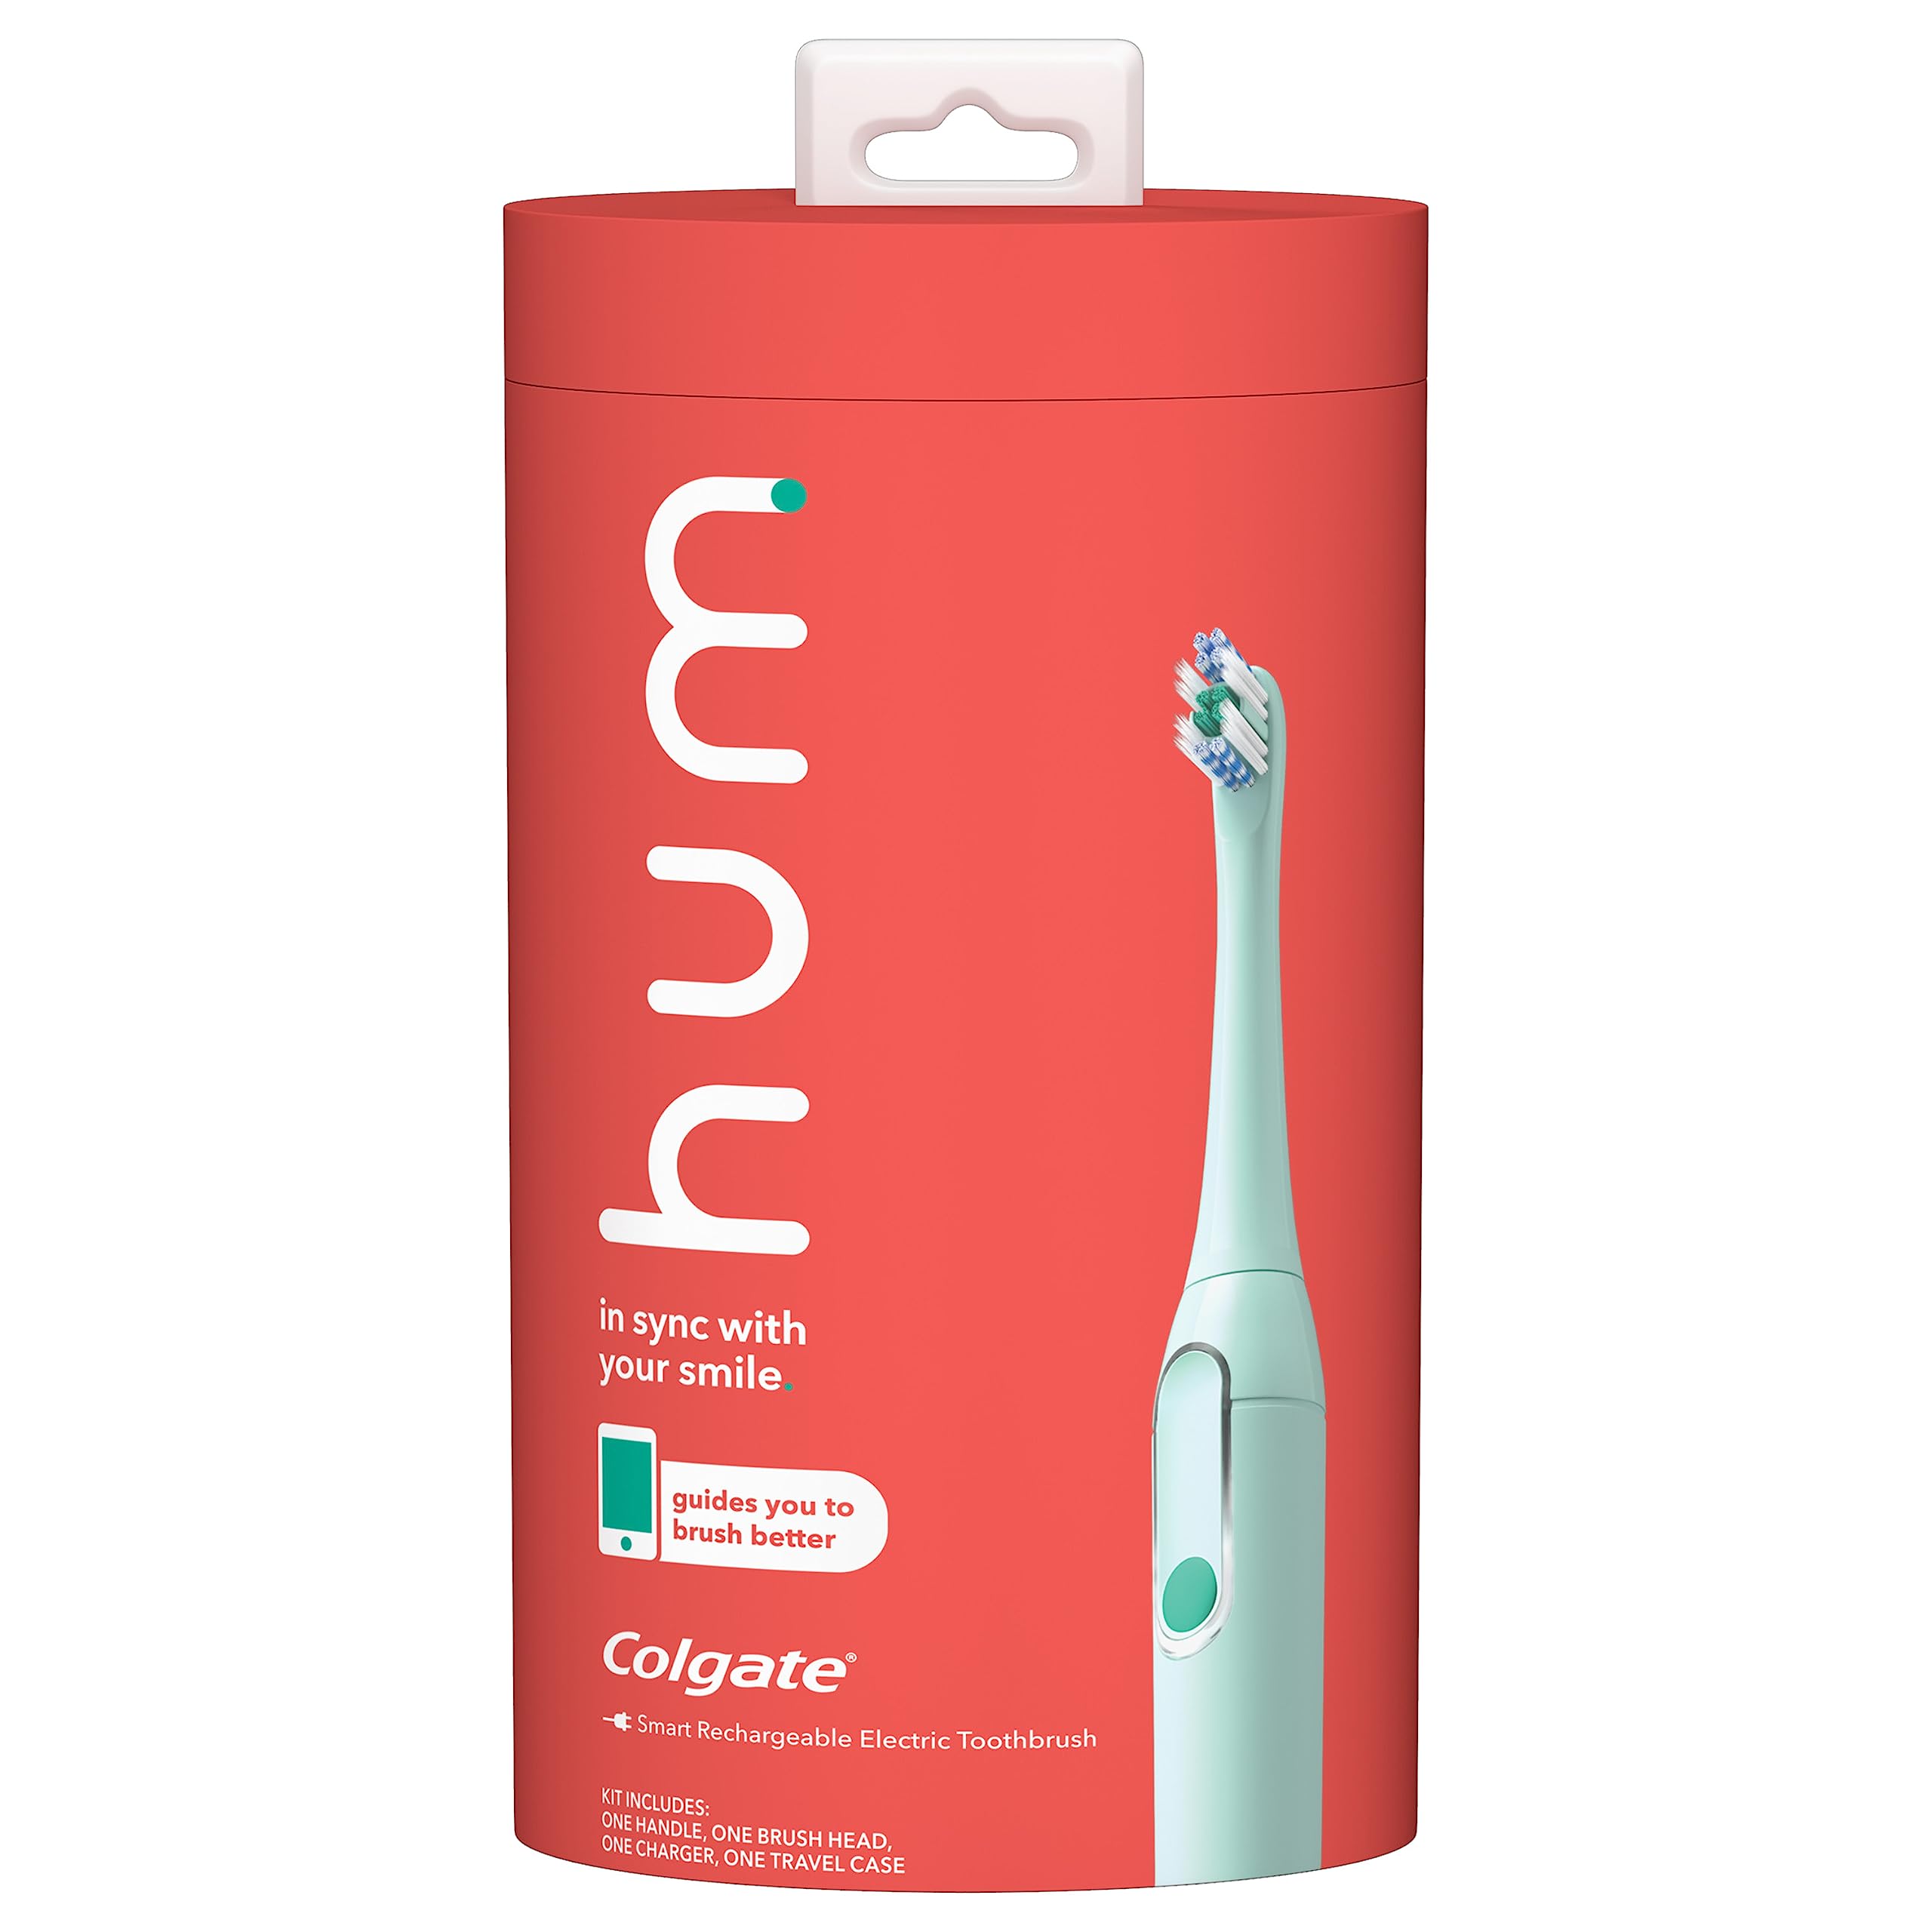 Colgate Hum Smart Electric Toothbrush w/ Timer, Bluetooth and Travel Case (Teal) $11.75 + Free Shipping w/ Prime or on $35+